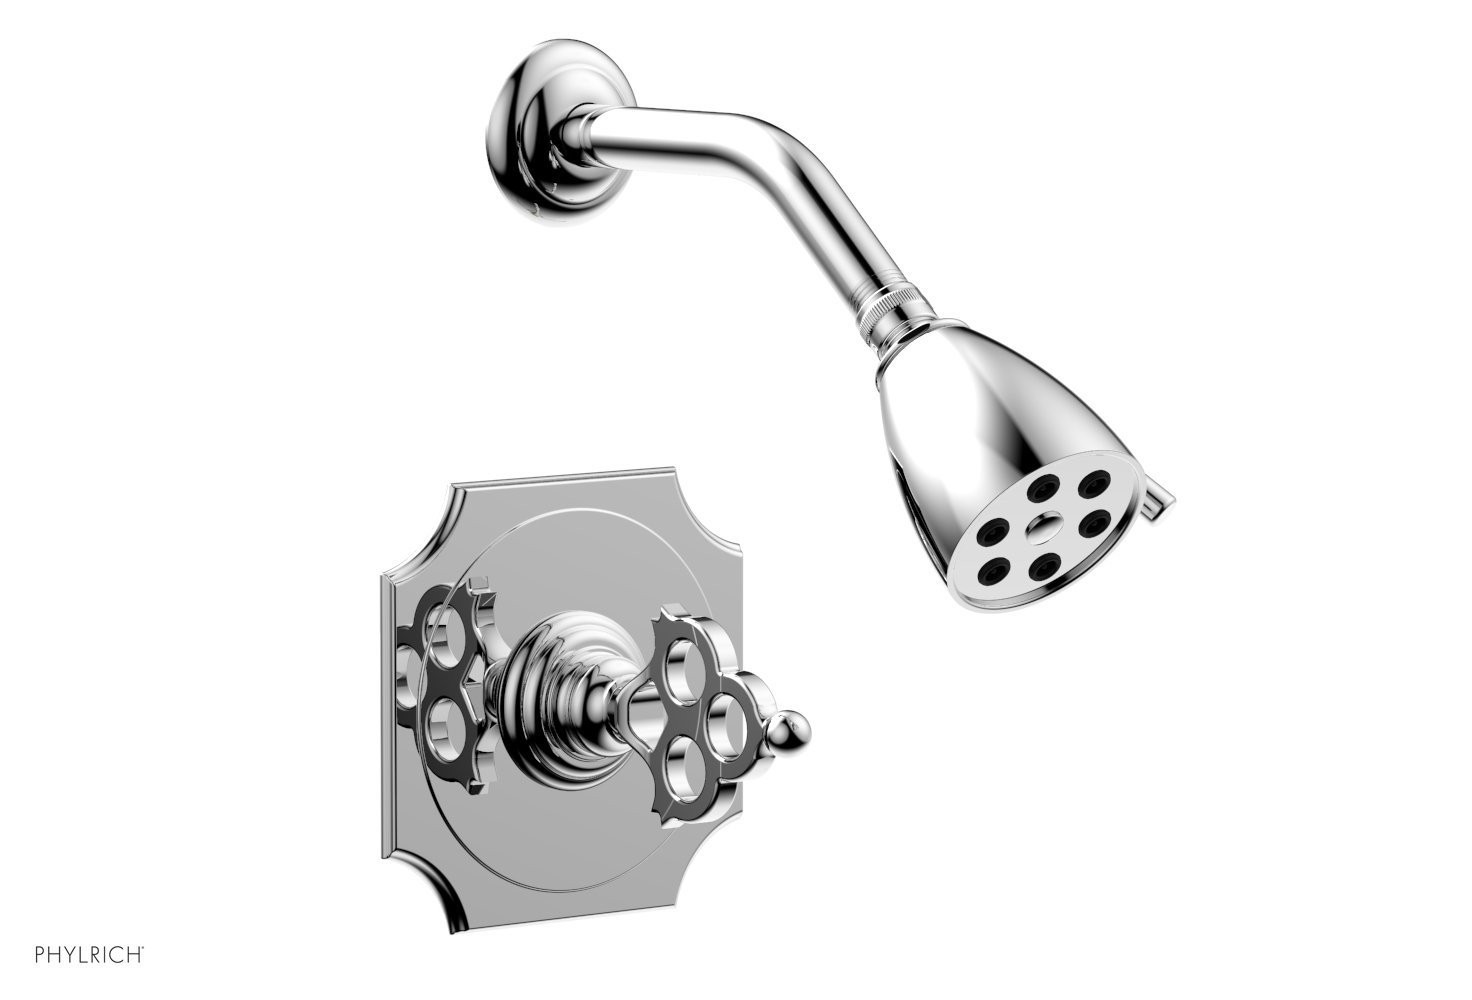 PHYLRICH 164-21/026 MAISON WALL MOUNT PRESSURE BALANCE SHOWER SET WITH BLADE HANDLE